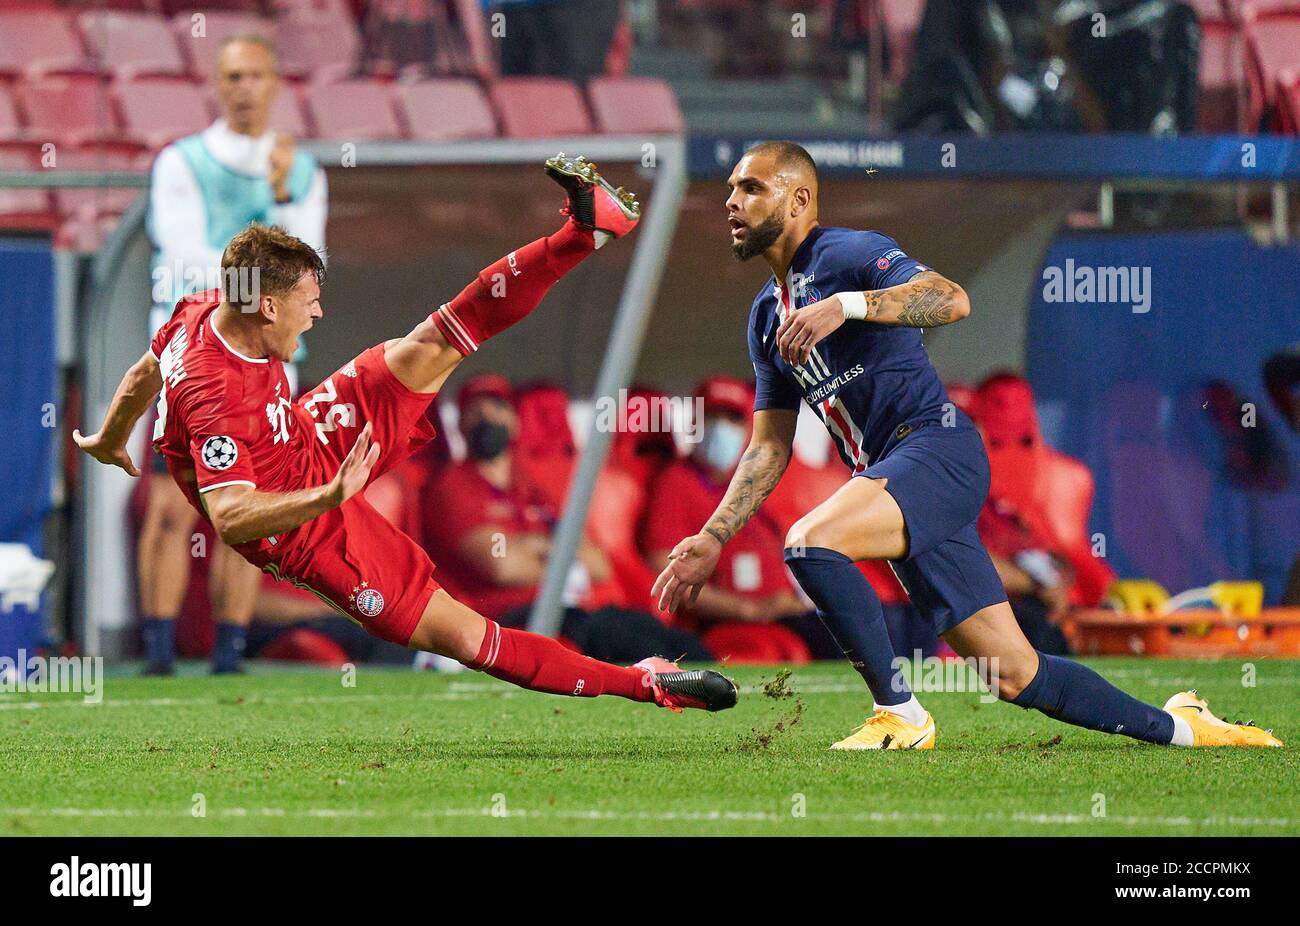 Lisbon, Lissabon, Portugal, 23rd August 2020.  Joshua KIMMICH, FCB 32  compete for the ball, tackling, duel, header, zweikampf, action, fight against Layvin KURZAWA, PSG 20   in the final match UEFA Champions League, final tournament FC BAYERN MUENCHEN - PARIS ST. GERMAIN (PSG) 1-0 in season 2019/2020, FCB,  © Peter Schatz / Alamy Live News / Pool   - UEFA REGULATIONS PROHIBIT ANY USE OF PHOTOGRAPHS as IMAGE SEQUENCES and/or QUASI-VIDEO -  National and international News-Agencies OUT Editorial Use ONLY Stock Photo